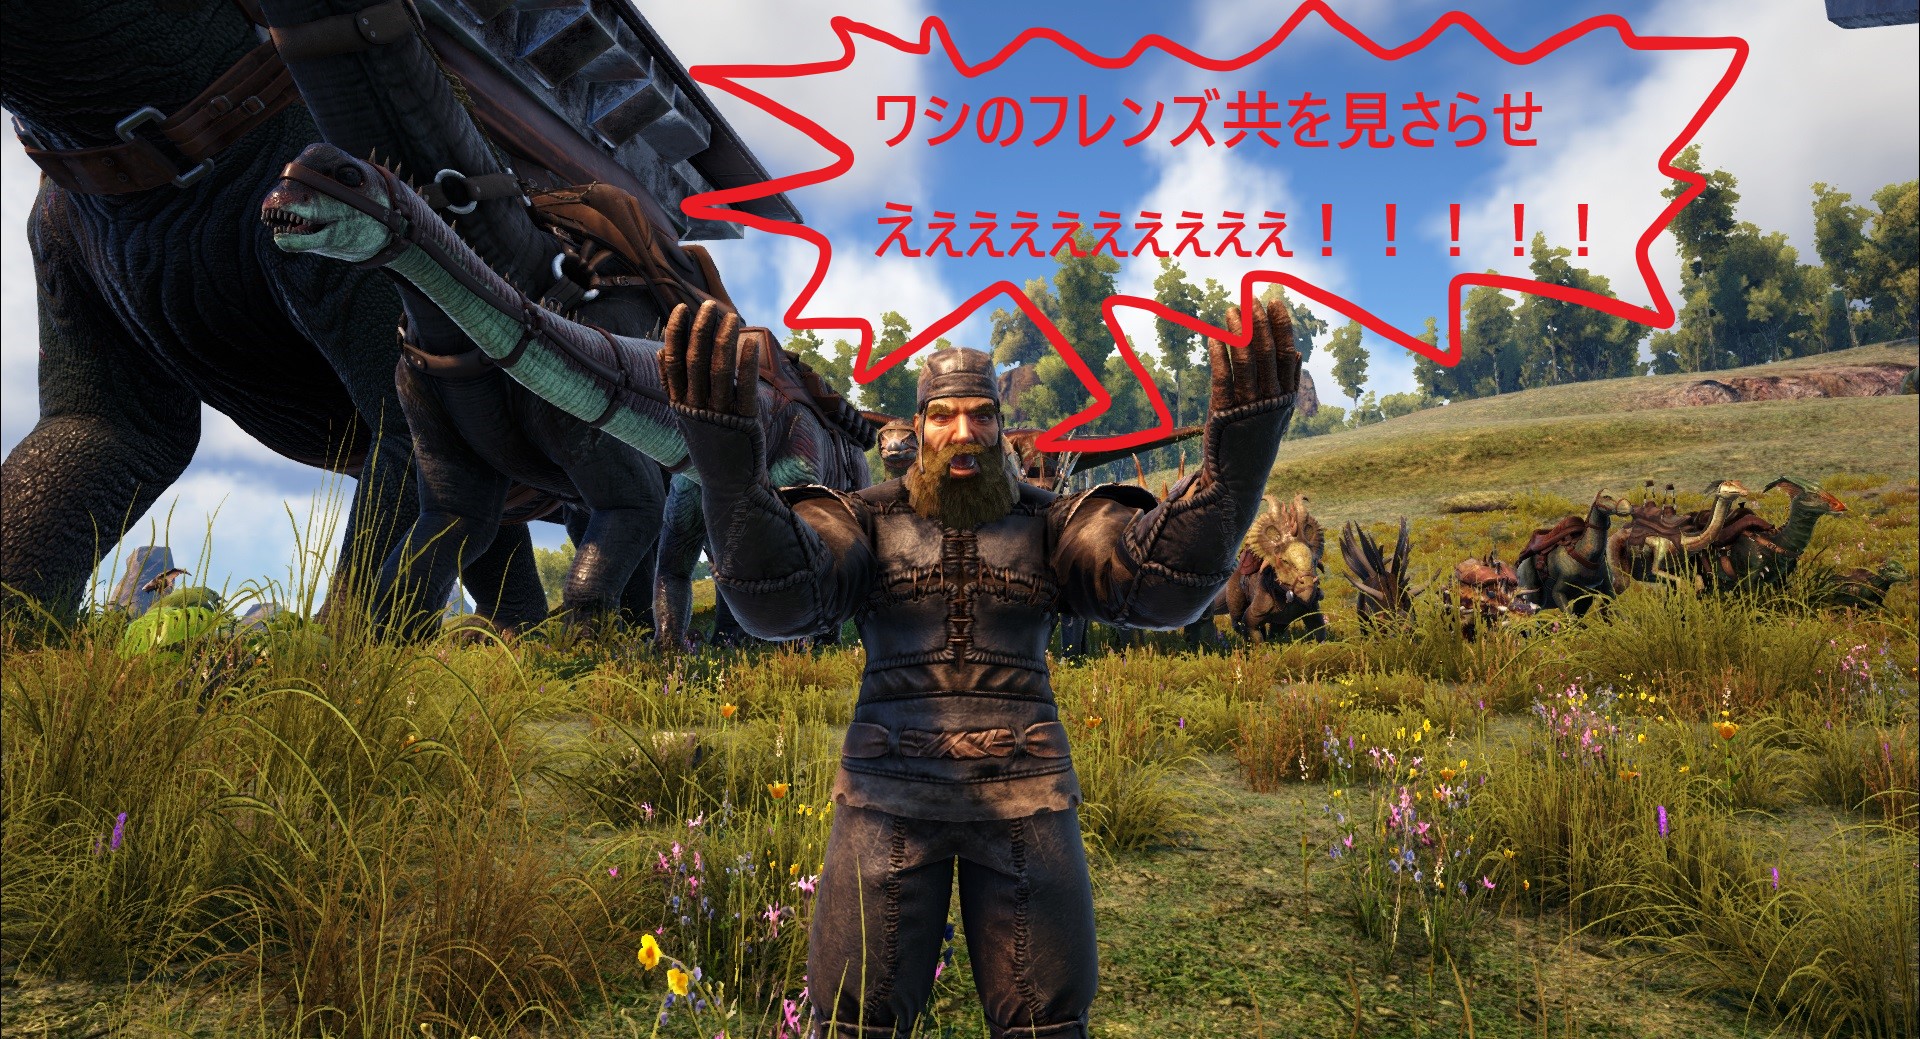 Ark Survival Evolved 恐竜紹介 草食恐竜編 娯楽道楽まとめ大陸